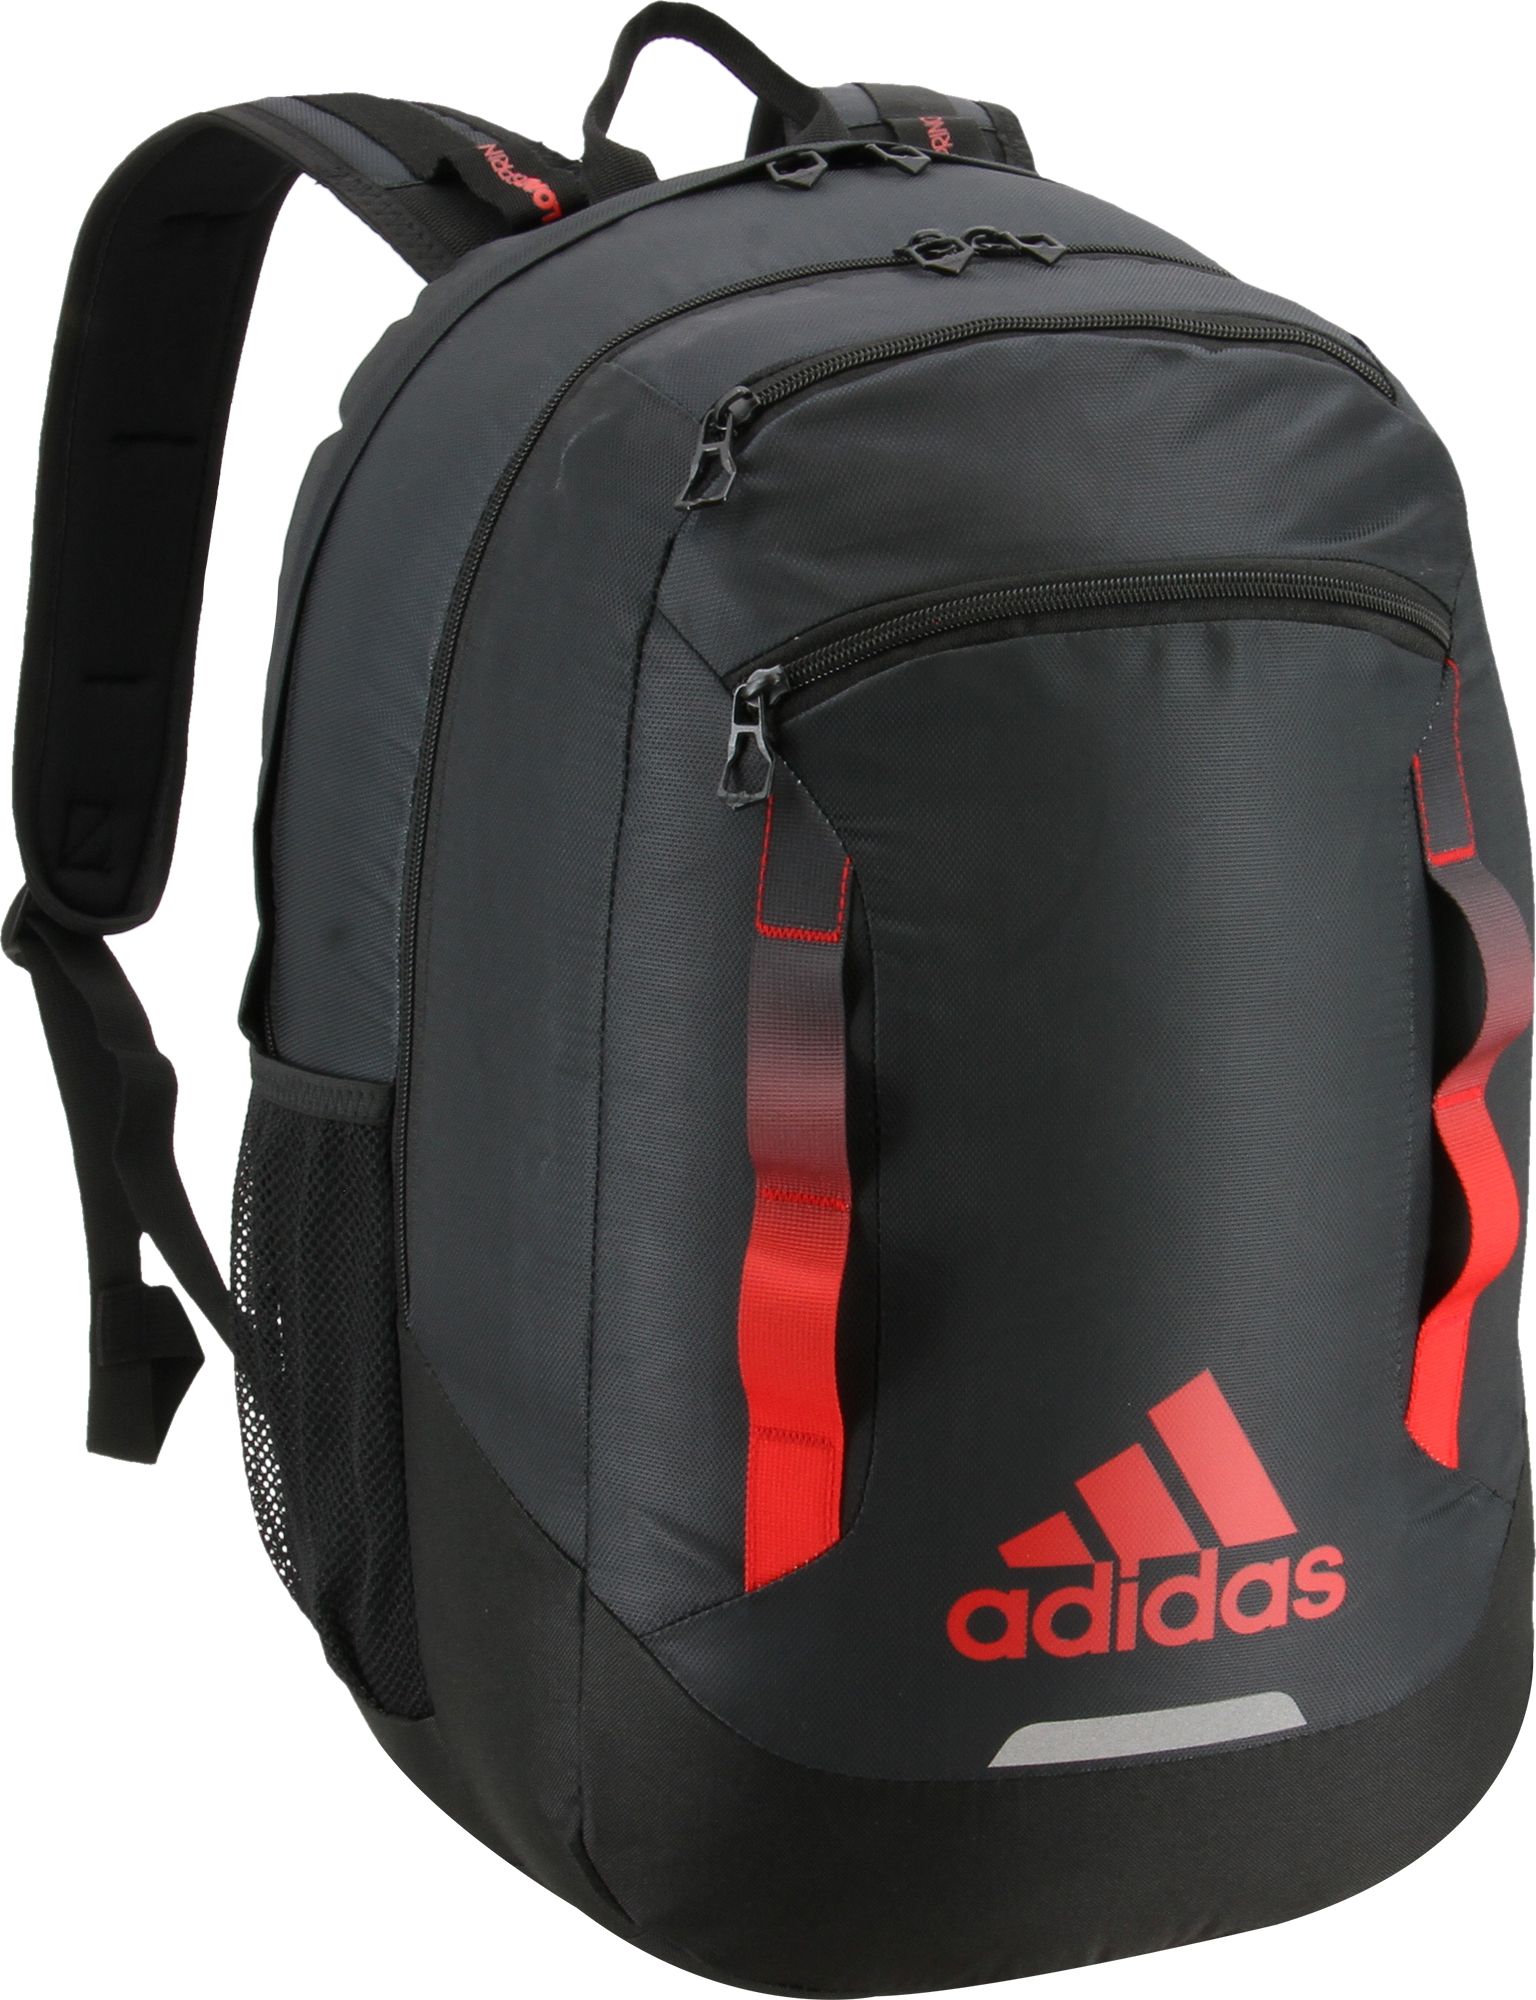 adidas Rival Backpack | DICK'S Sporting 